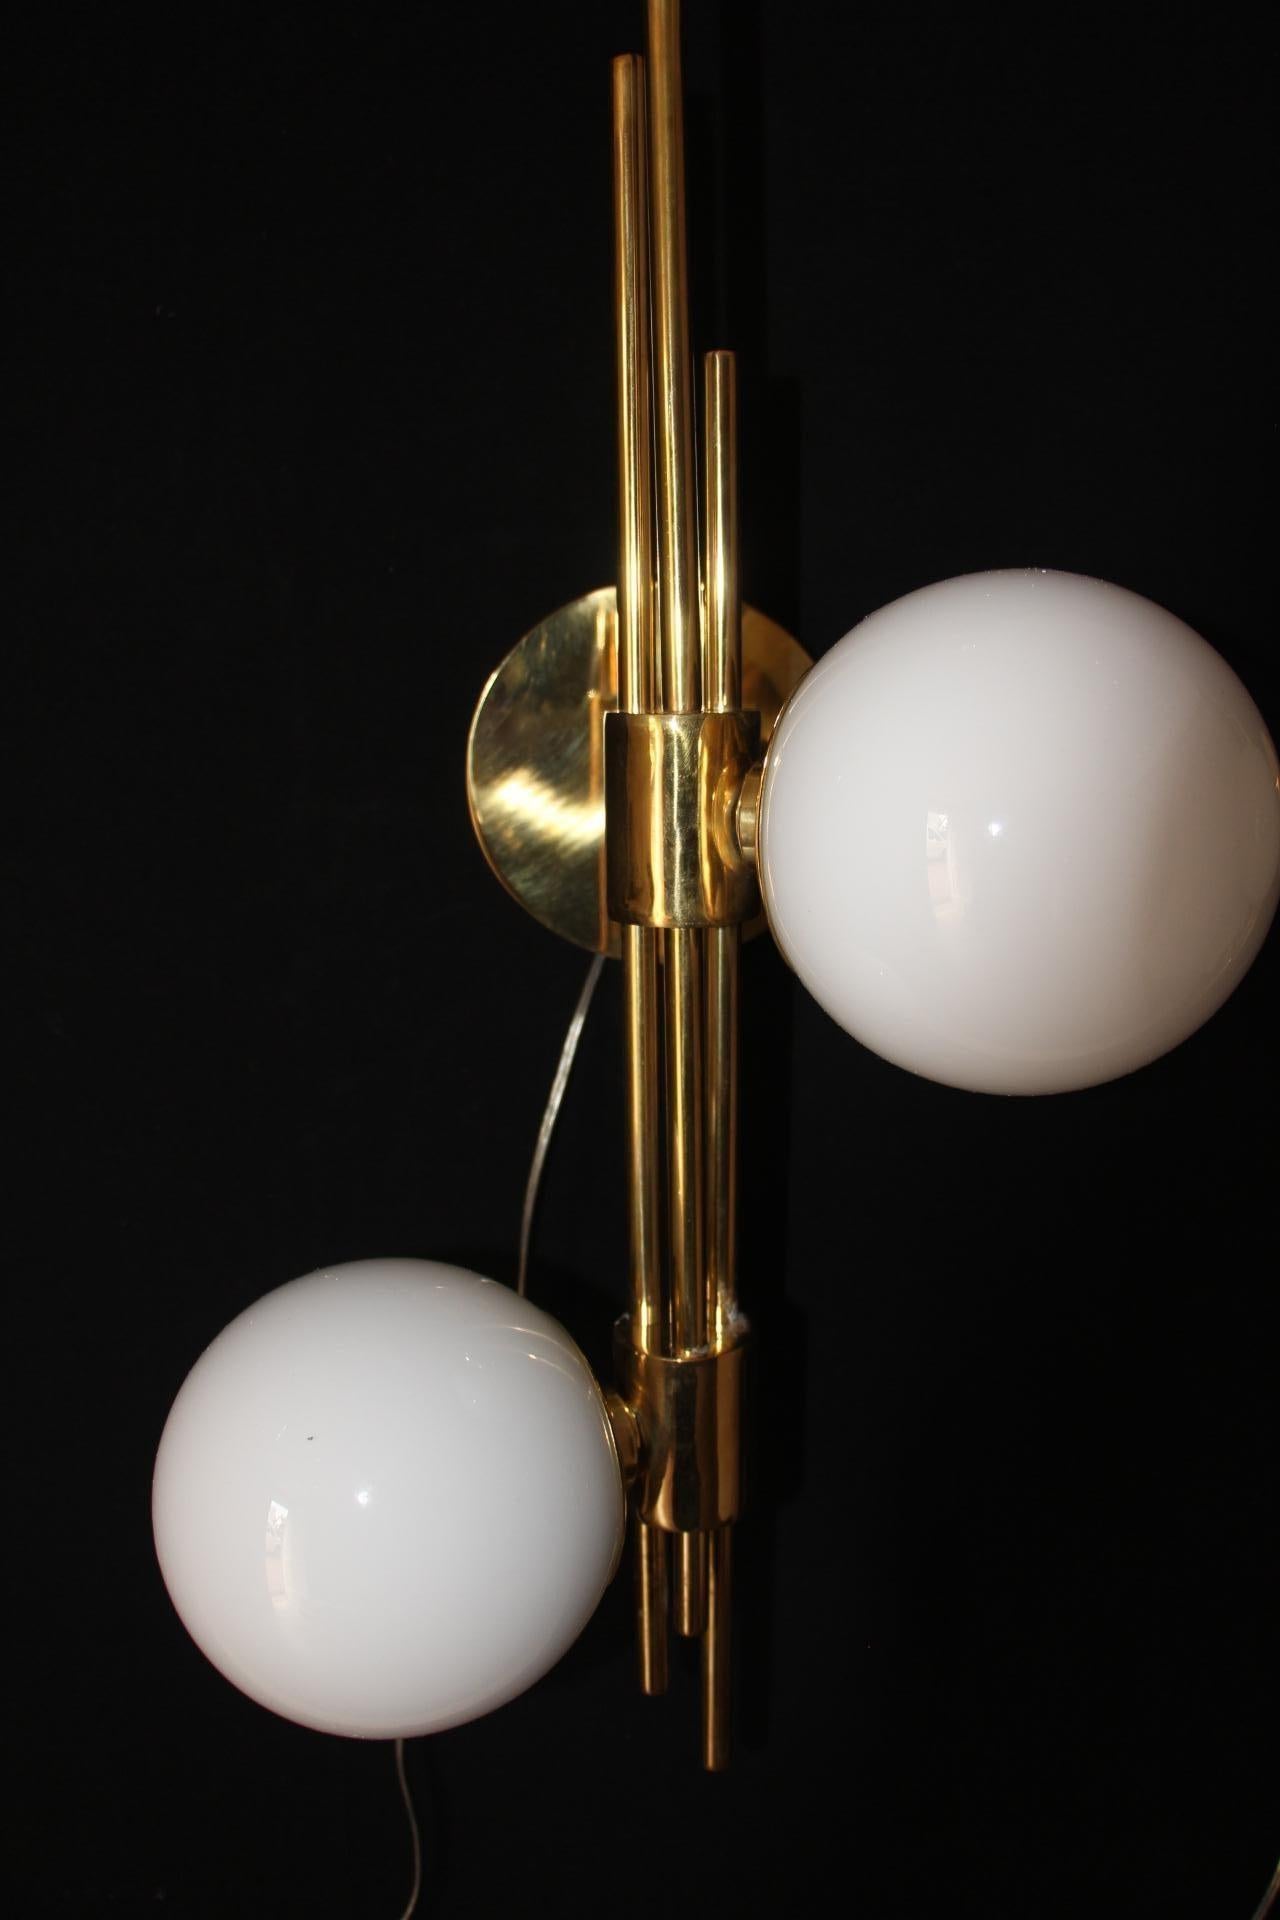 Mid-Century Modern Modern Pair of Brass and White Glass Sconces, Stilnovo Style Wall Lights